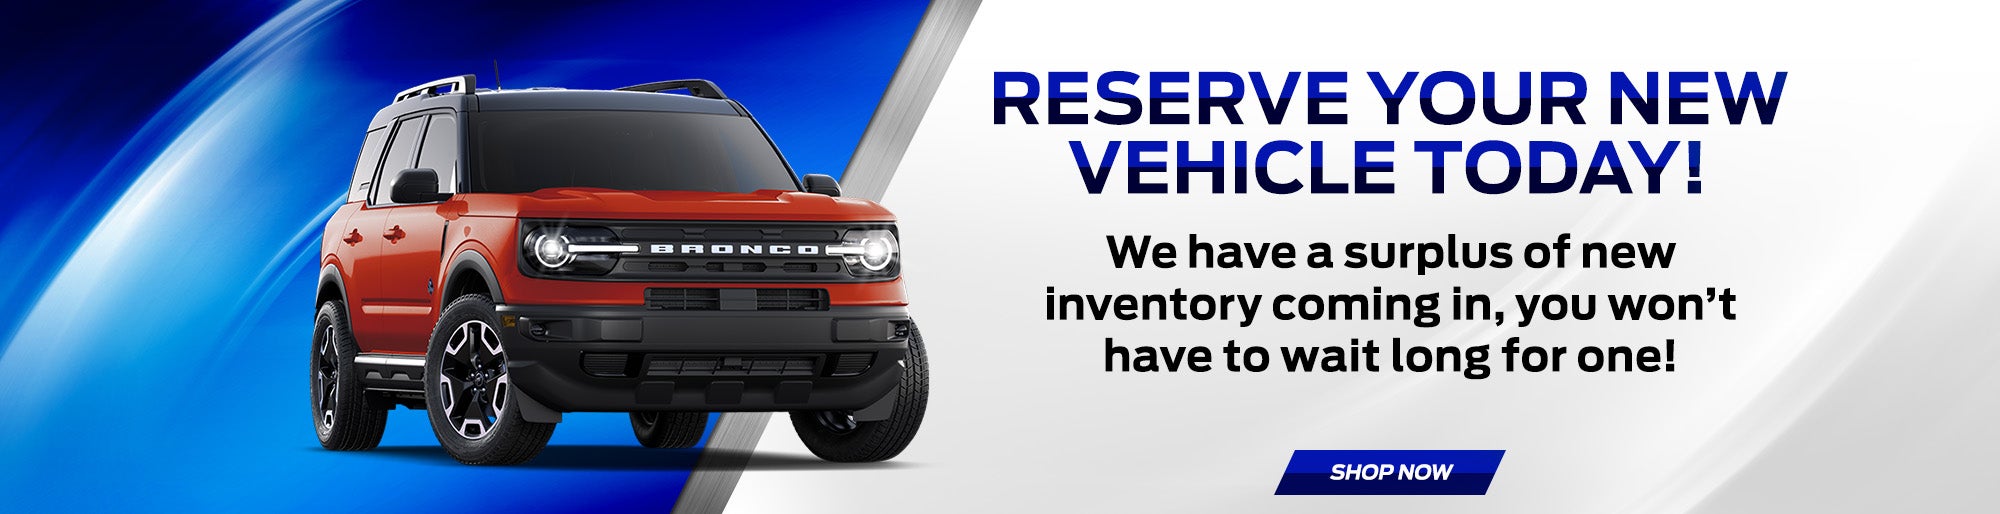 Reserve Your New Vehicle